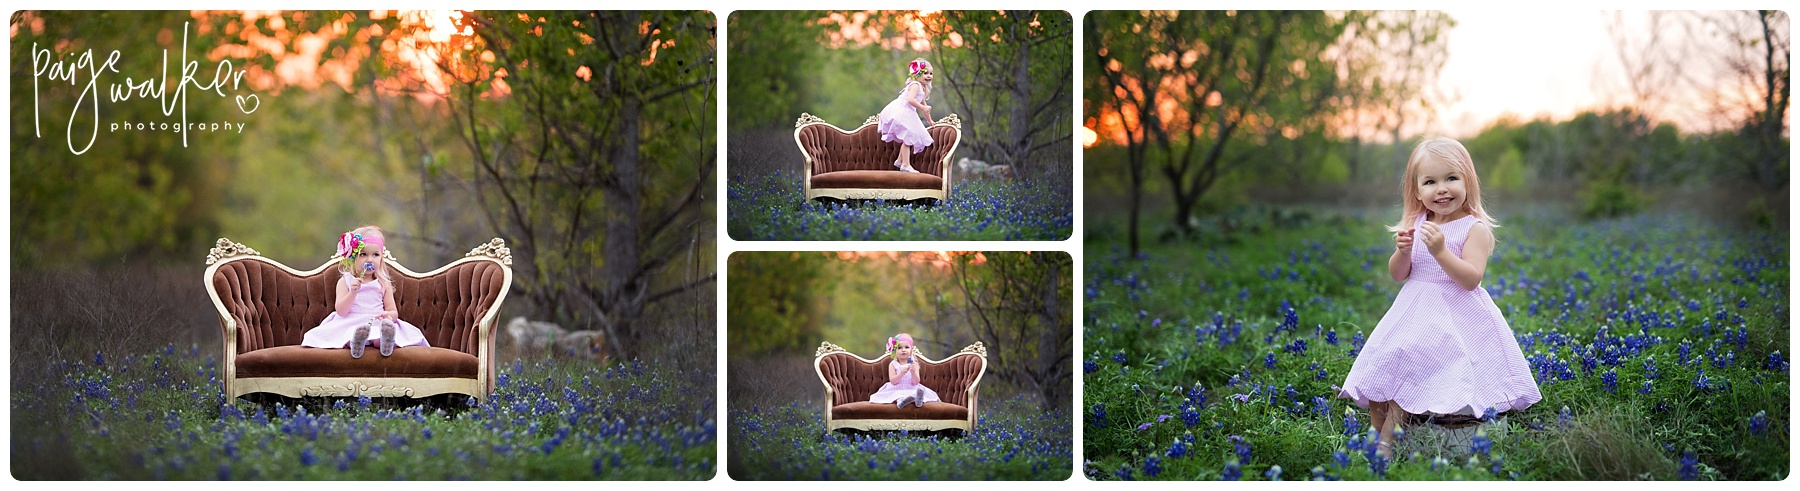 kid jumping on a couch in bluebonnets